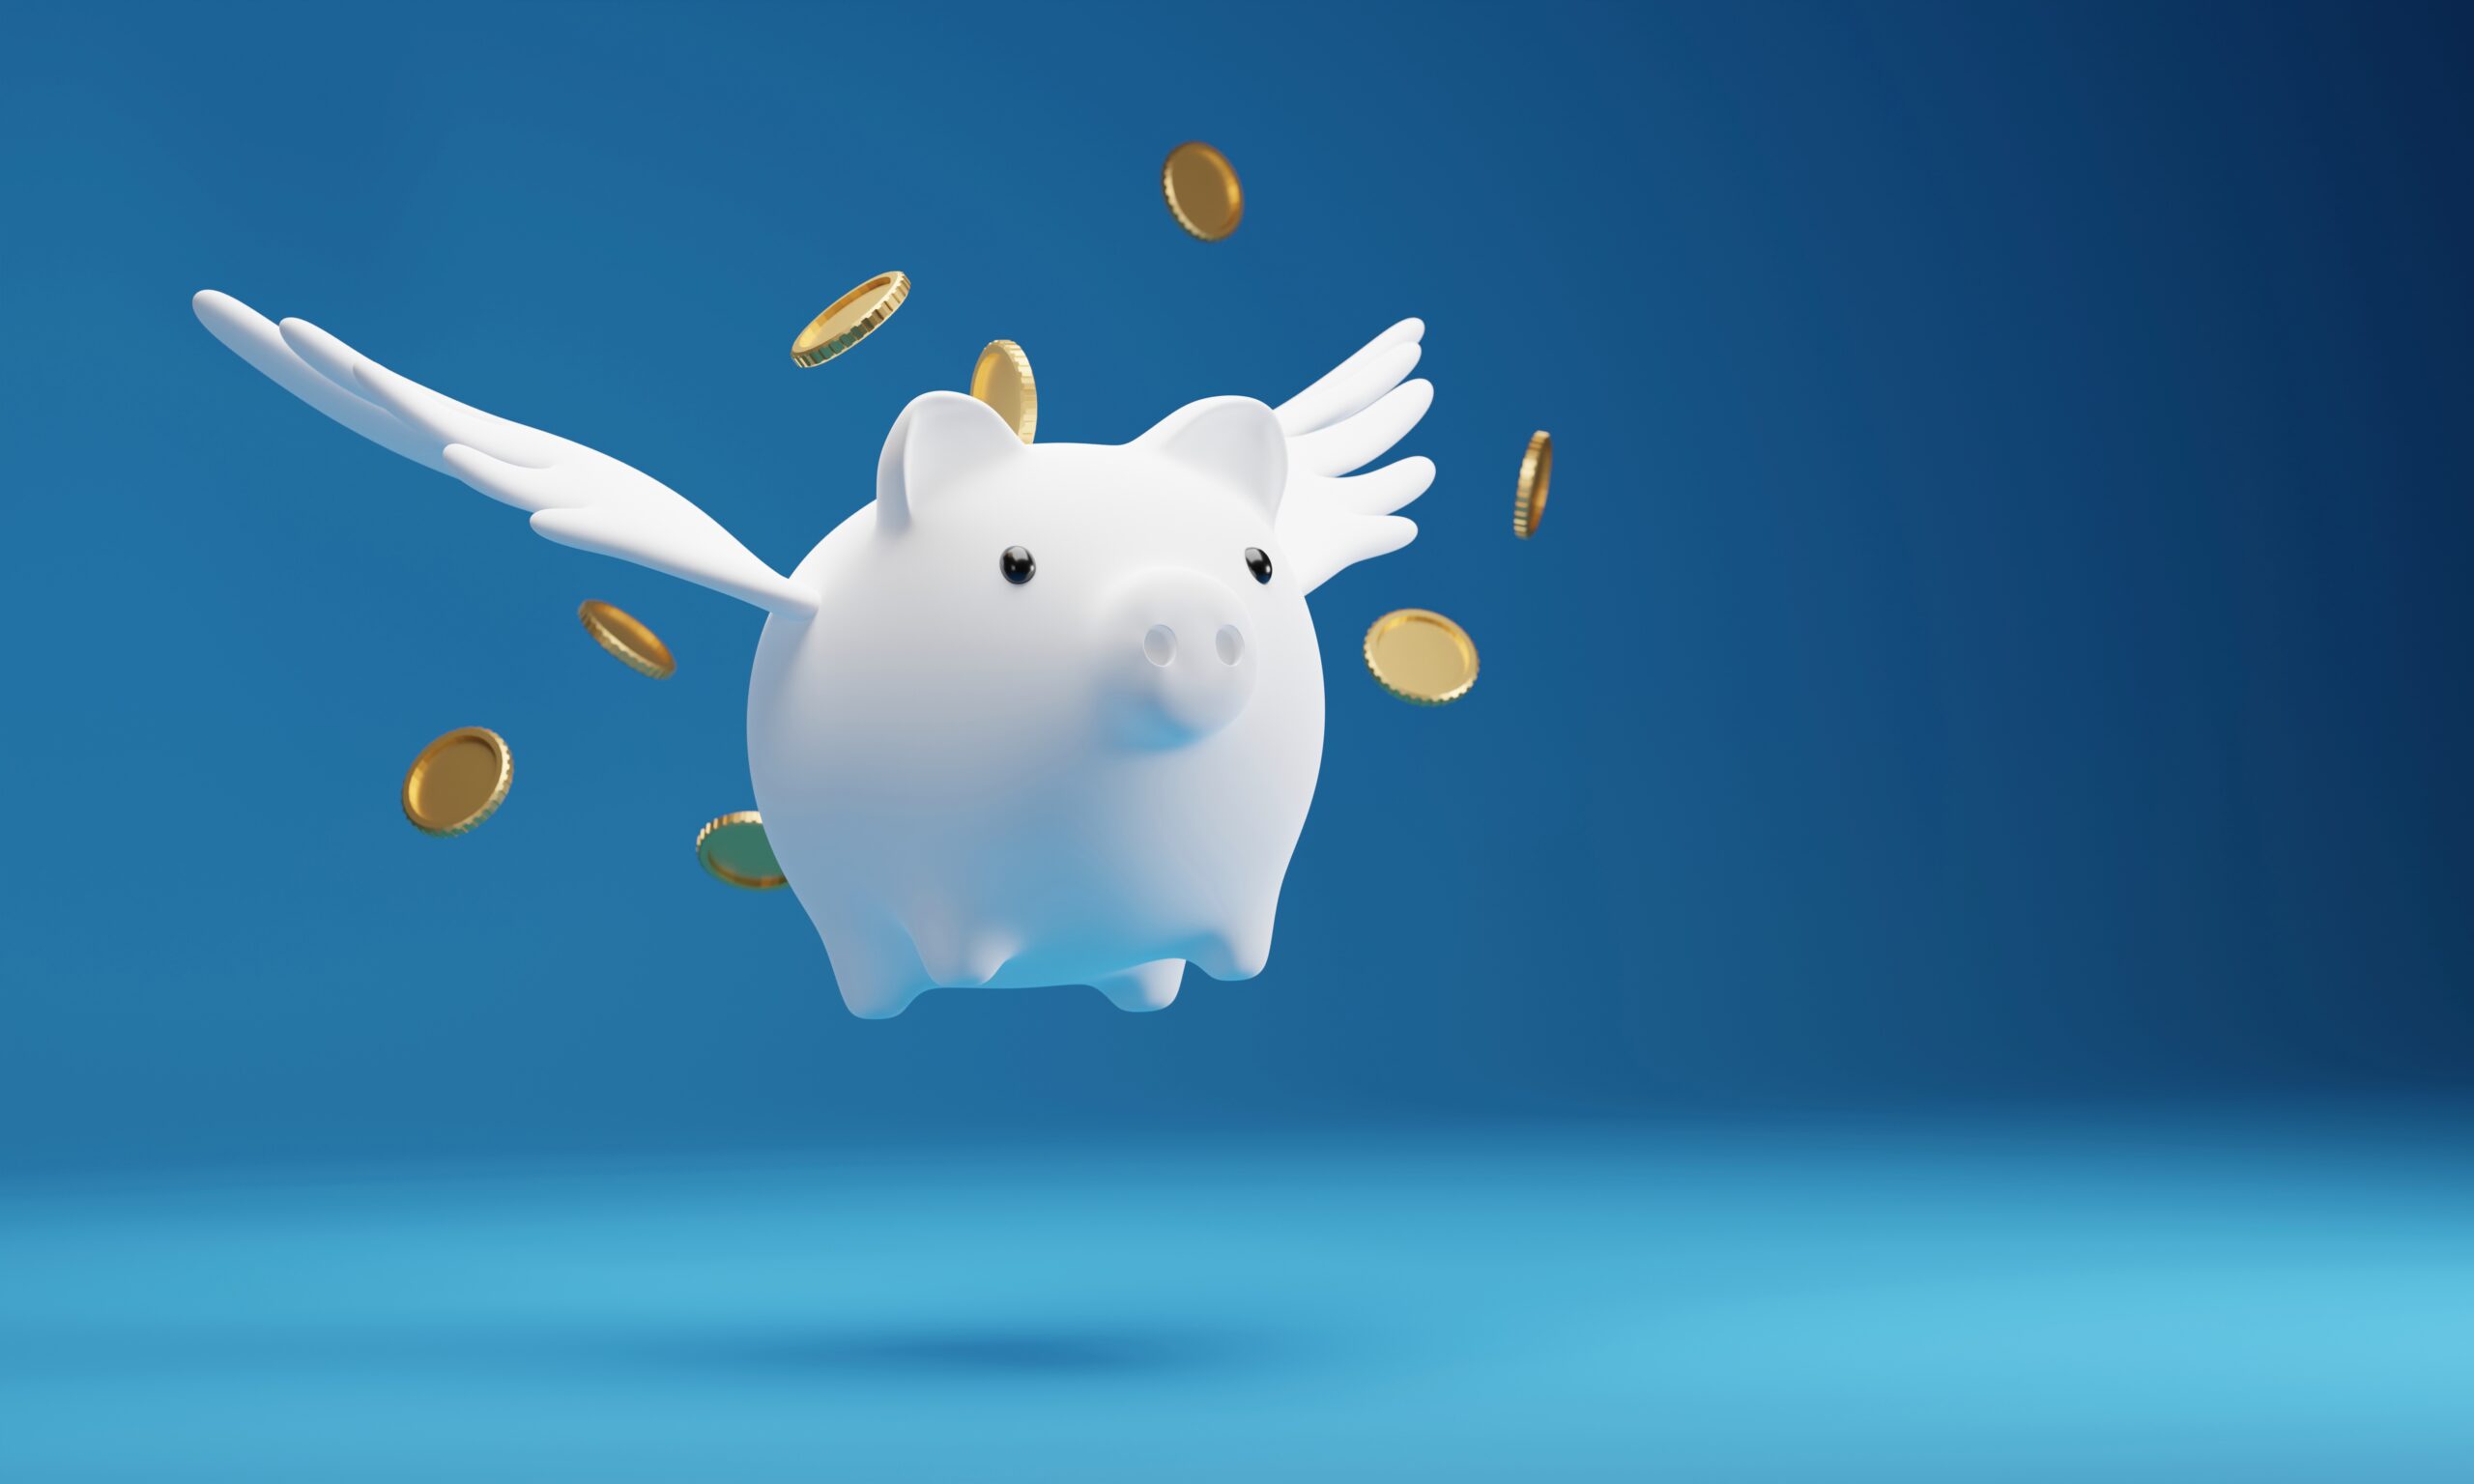 A digital image of a white piggy bank with wings floating mid-air with coins floating around it, set against a blue background.